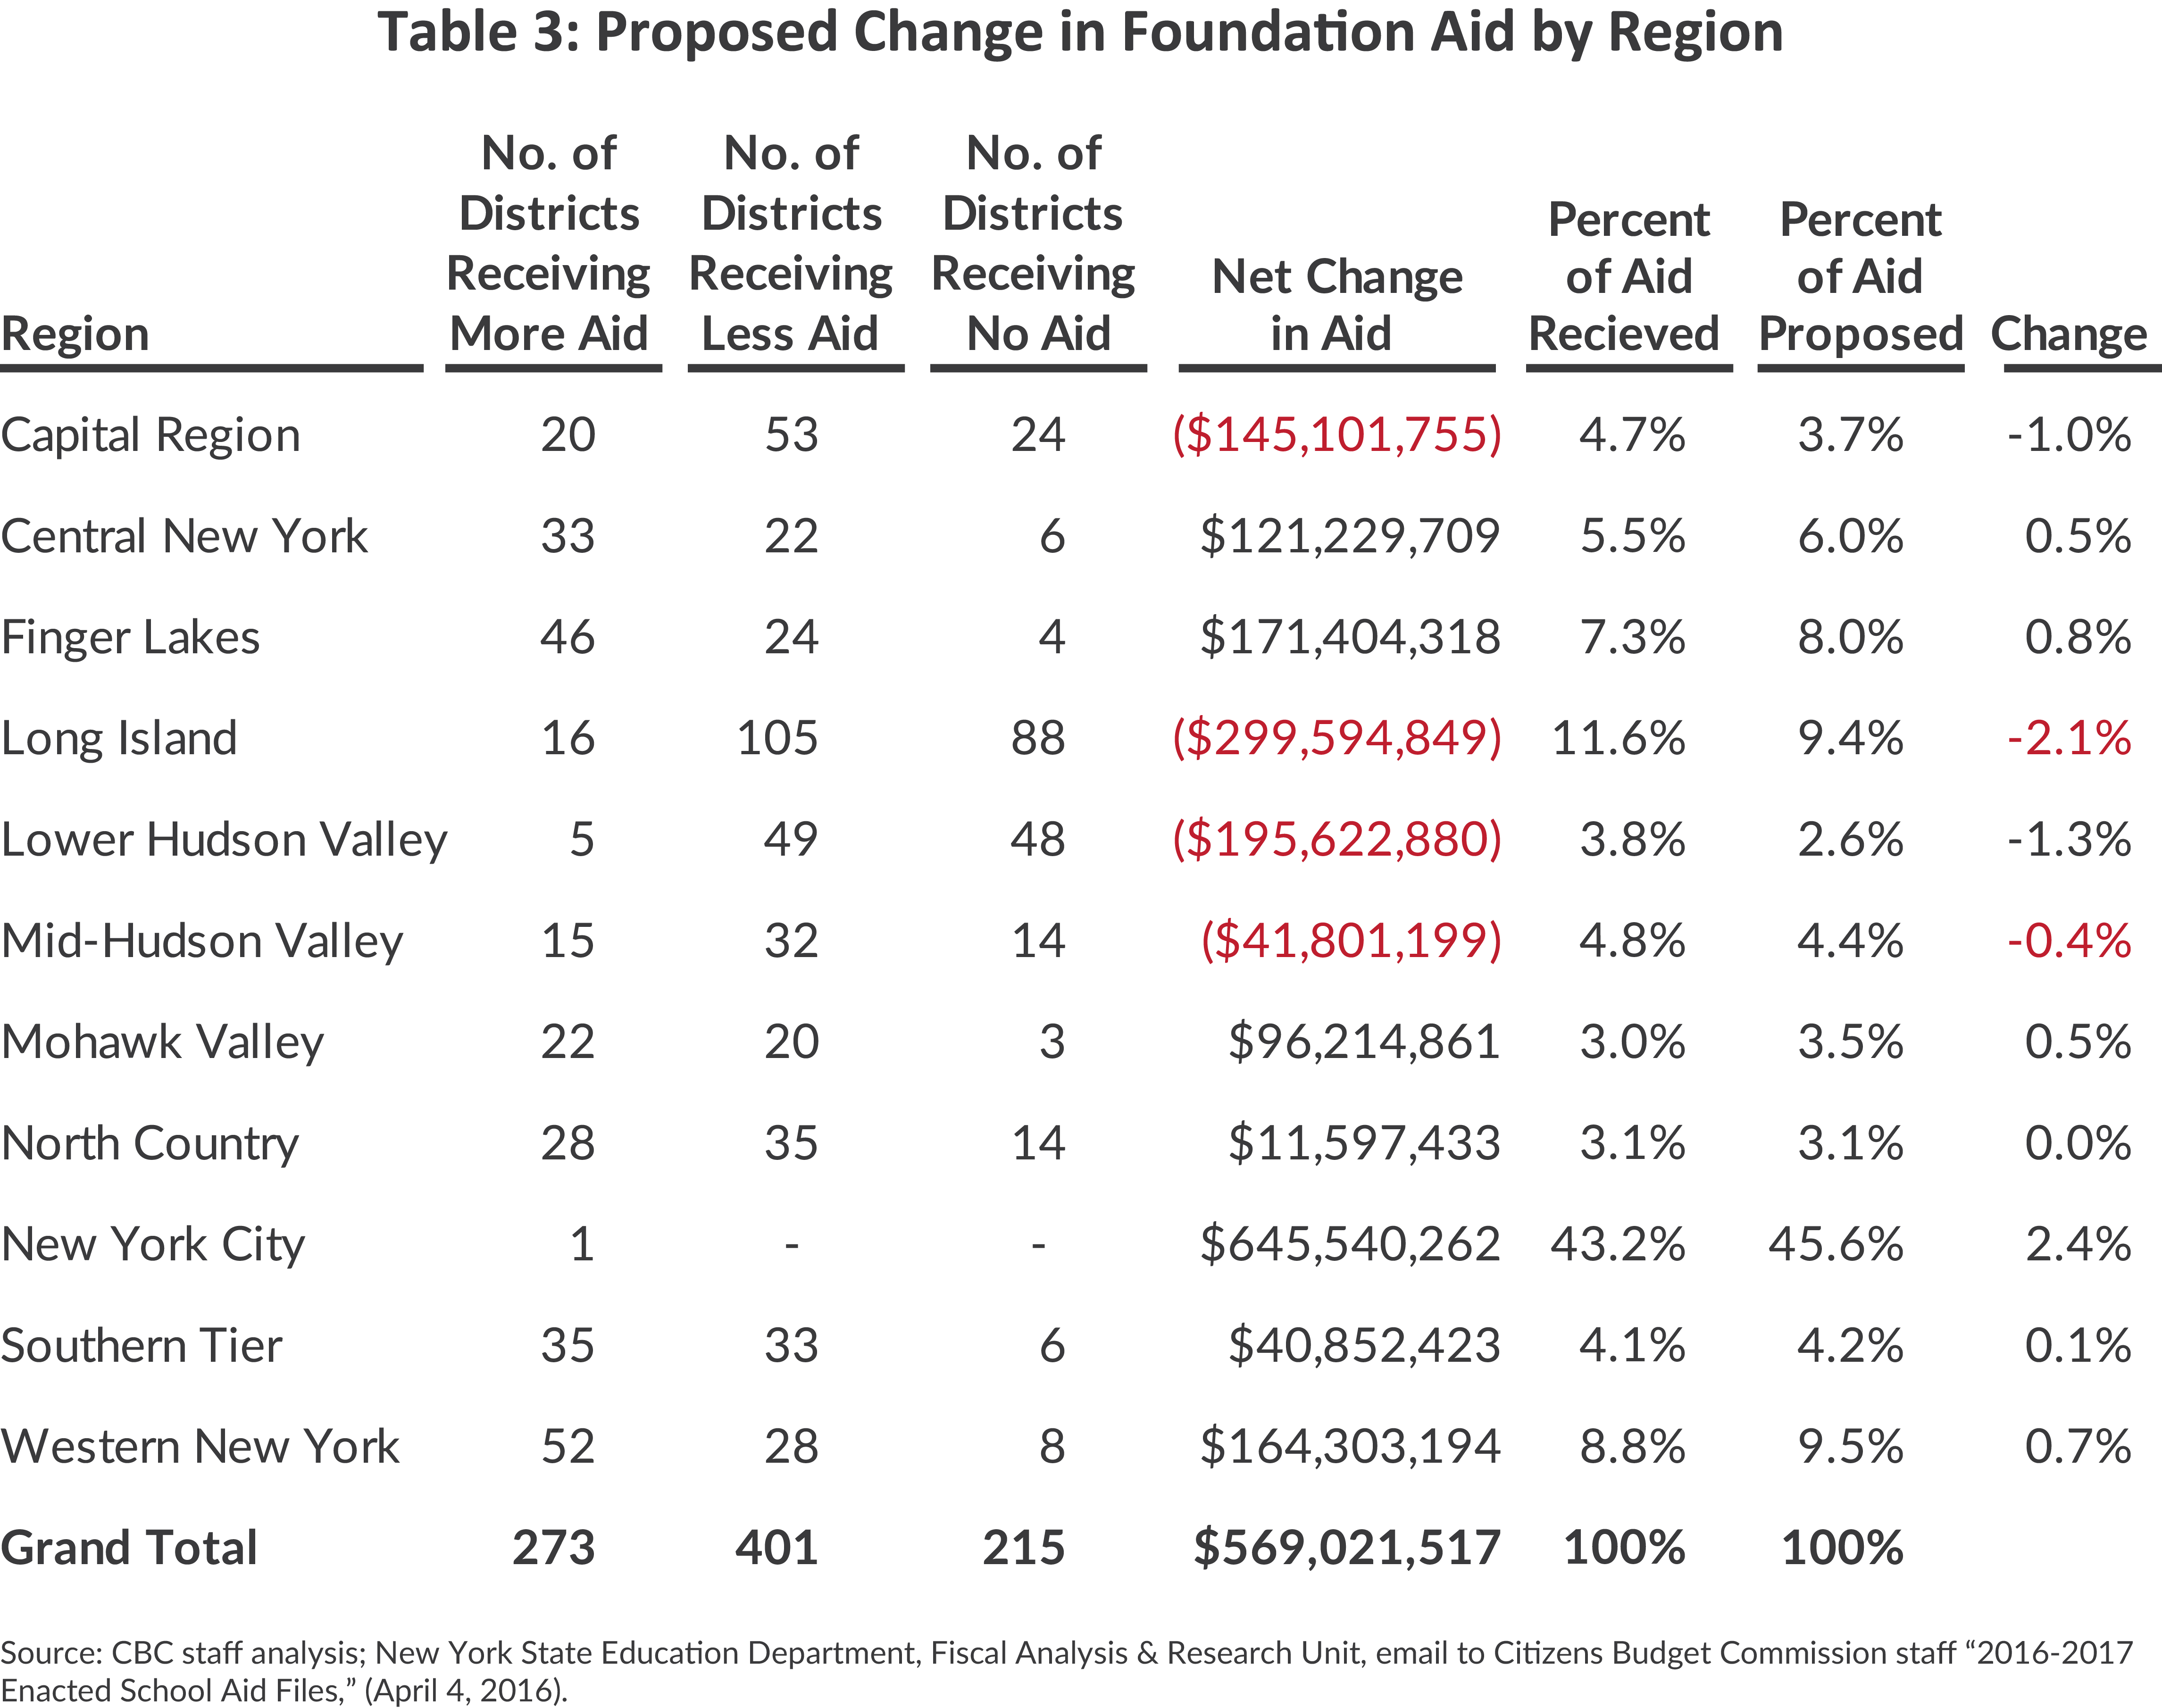 Proposed changes in foundation aid by region